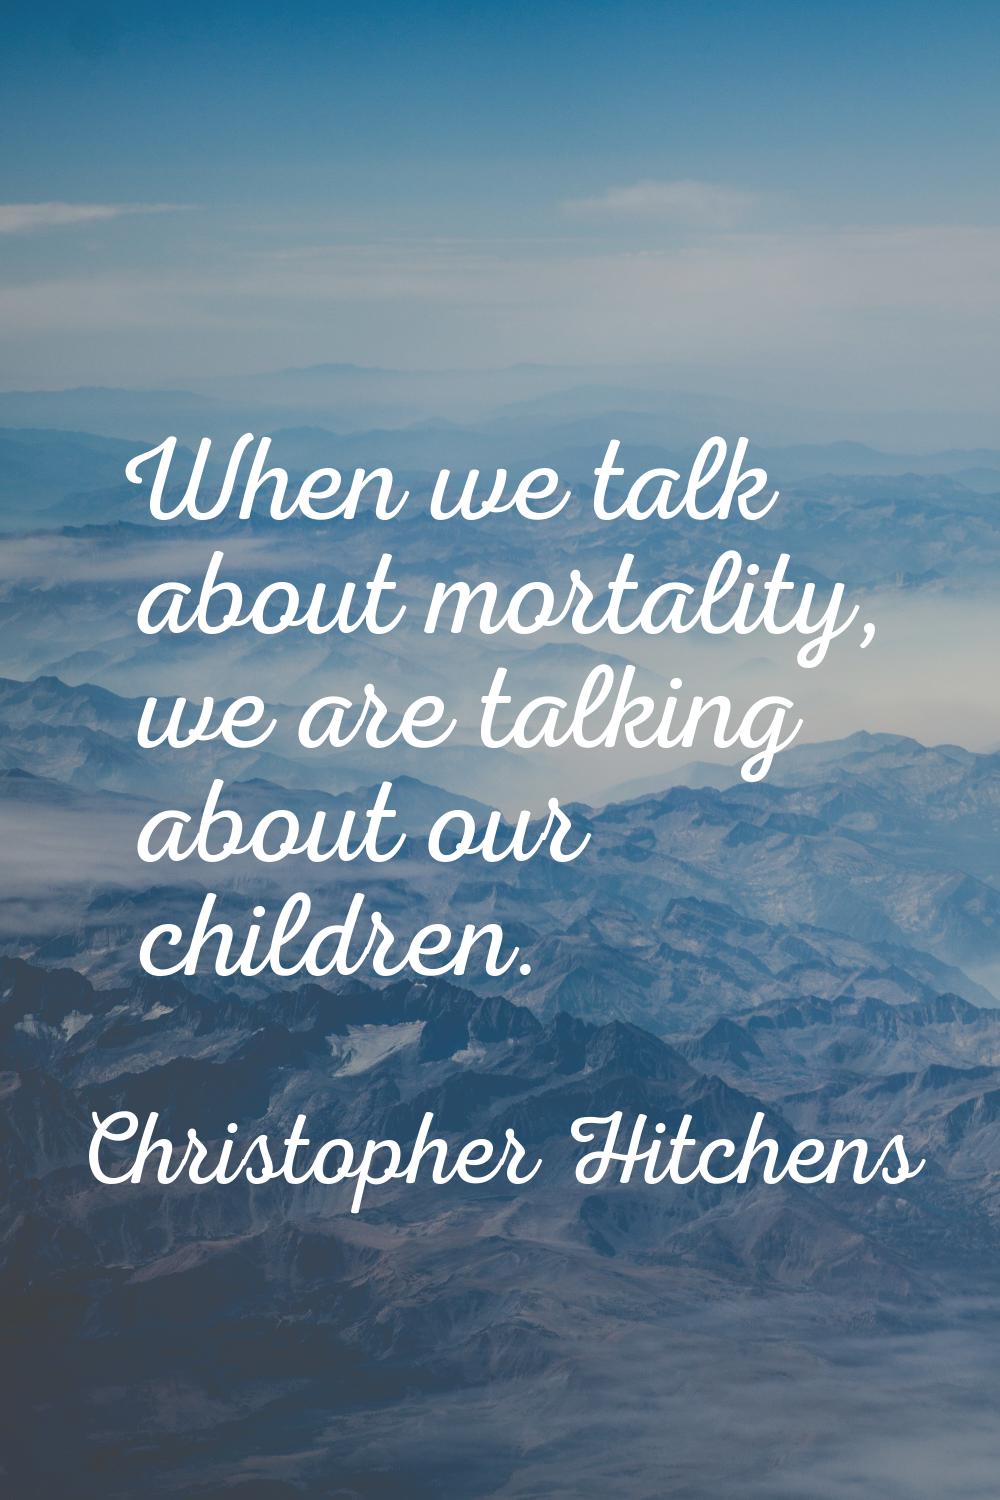 When we talk about mortality, we are talking about our children.